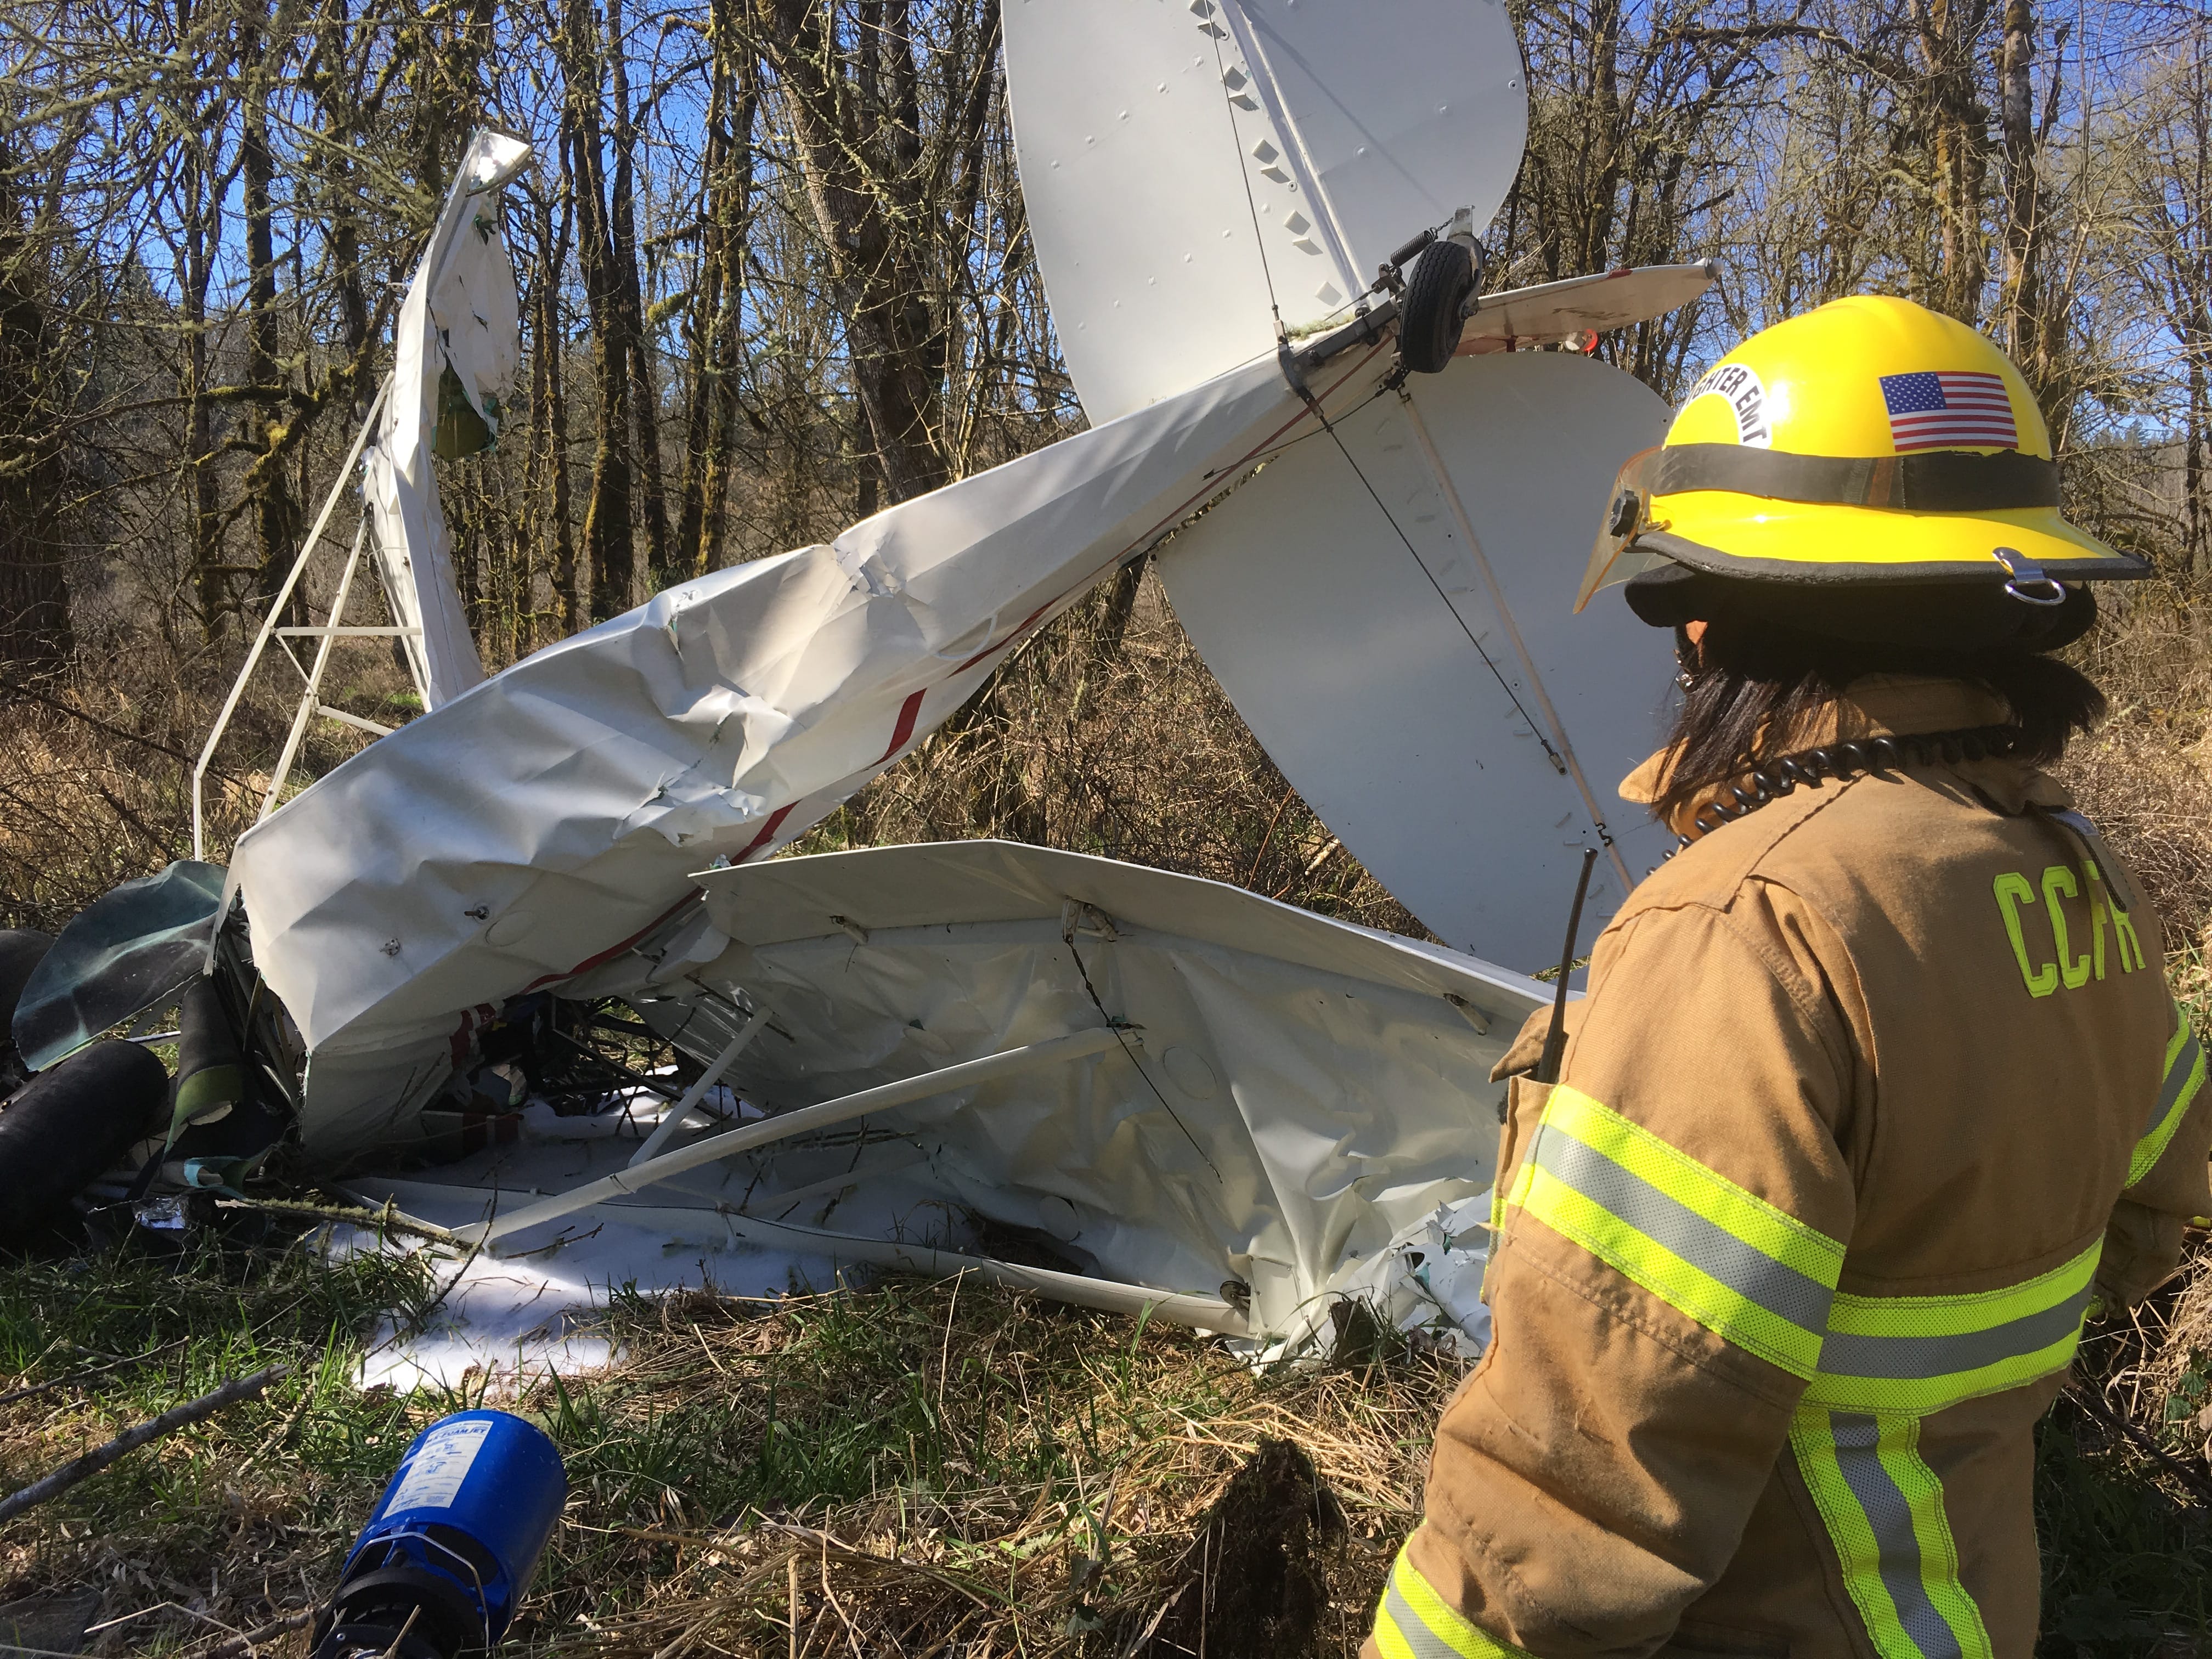 A firefighter inspects the wreckage of a crashed aircraft Sunday afternoon south of La Center. The plane crashed near Daybreak Field, killing its pilot, 65-year-old Mary H. Rosenblum of Canby, Ore.